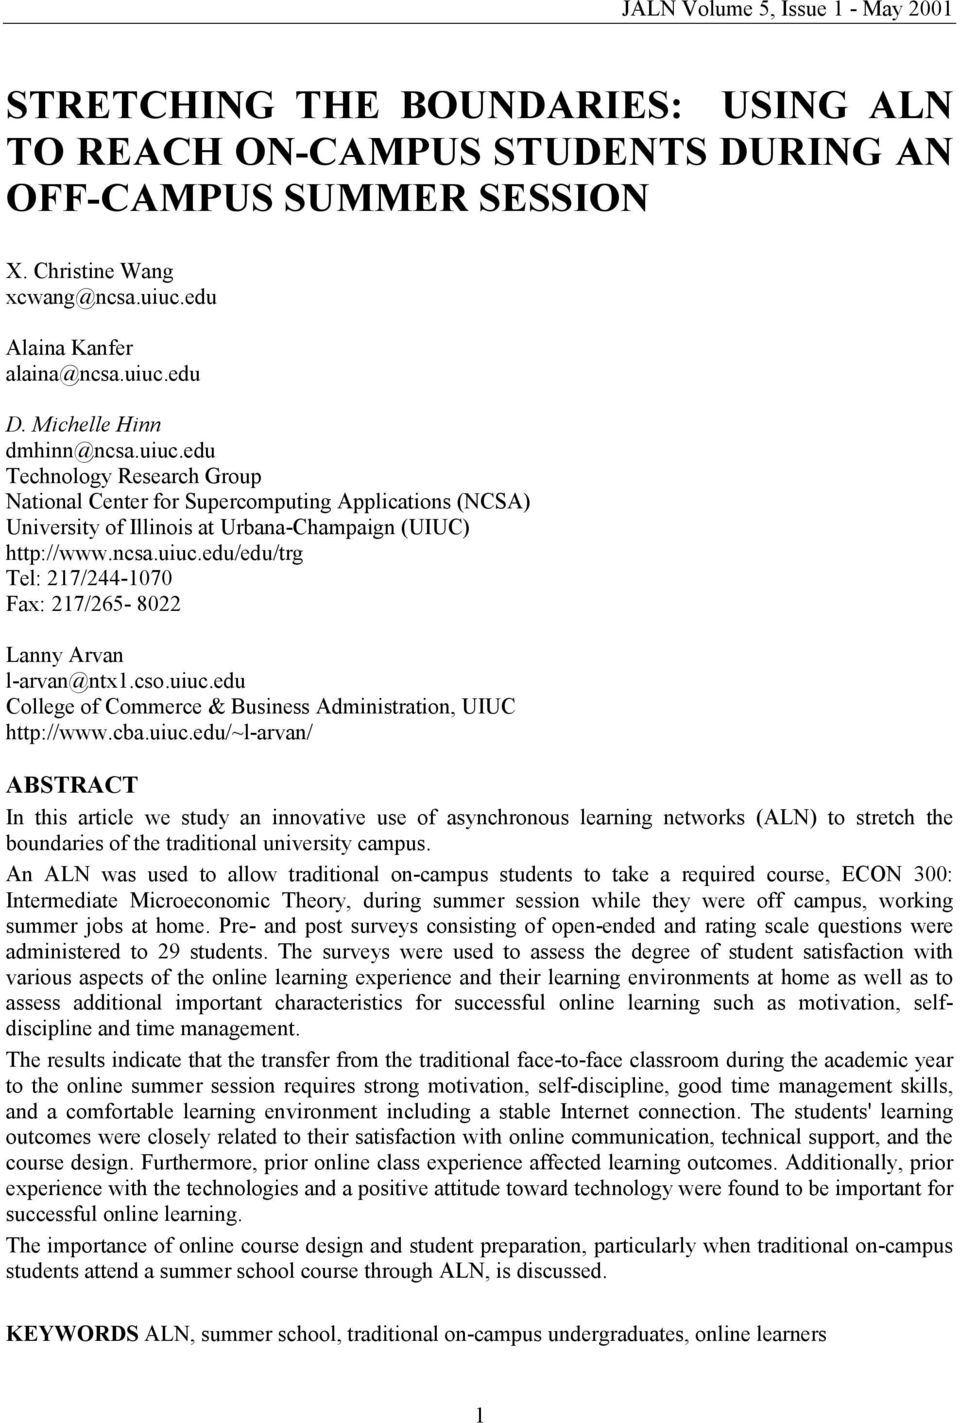 cso.uiuc.edu College of Commerce & Business Administration, UIUC http://www.cba.uiuc.edu/~l-arvan/ ABSTRACT In this article we study an innovative use of asynchronous learning networks (ALN) to stretch the boundaries of the traditional university campus.